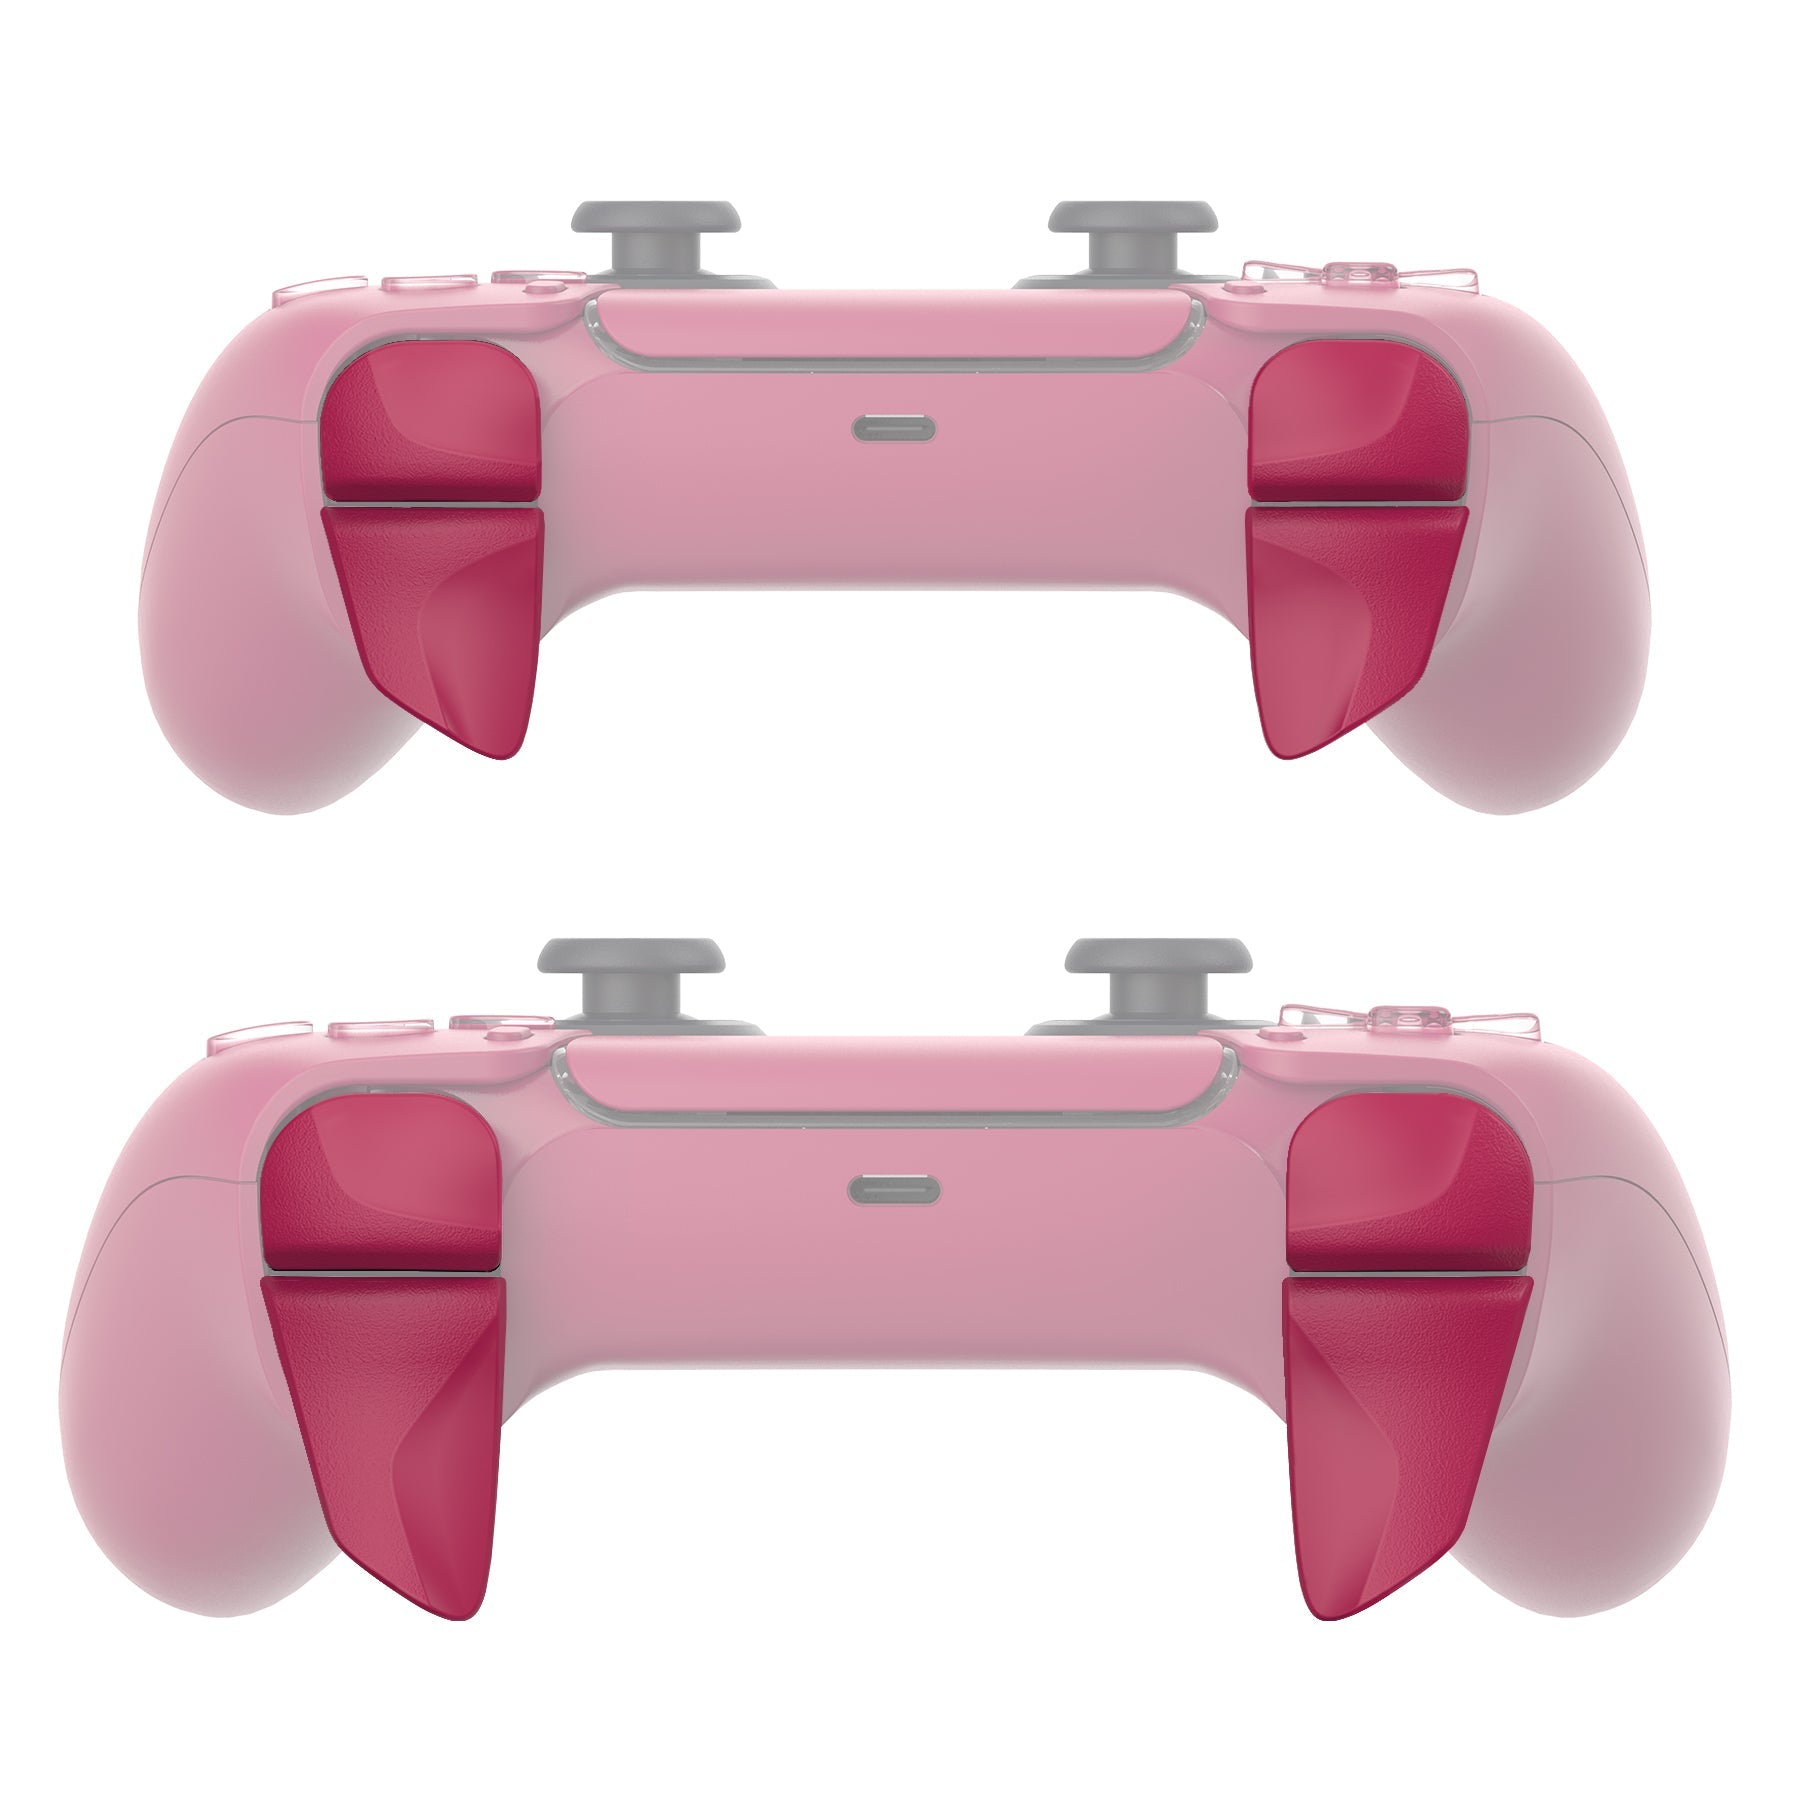 PlayVital Cosmic Red 2 Pair Shoulder Buttons Extension Triggers for PS5 Controller, Game Improvement Adjusters for PS5 Controller, Bumper Trigger Extenders for PS5 Controller - PFPJ048 PlayVital